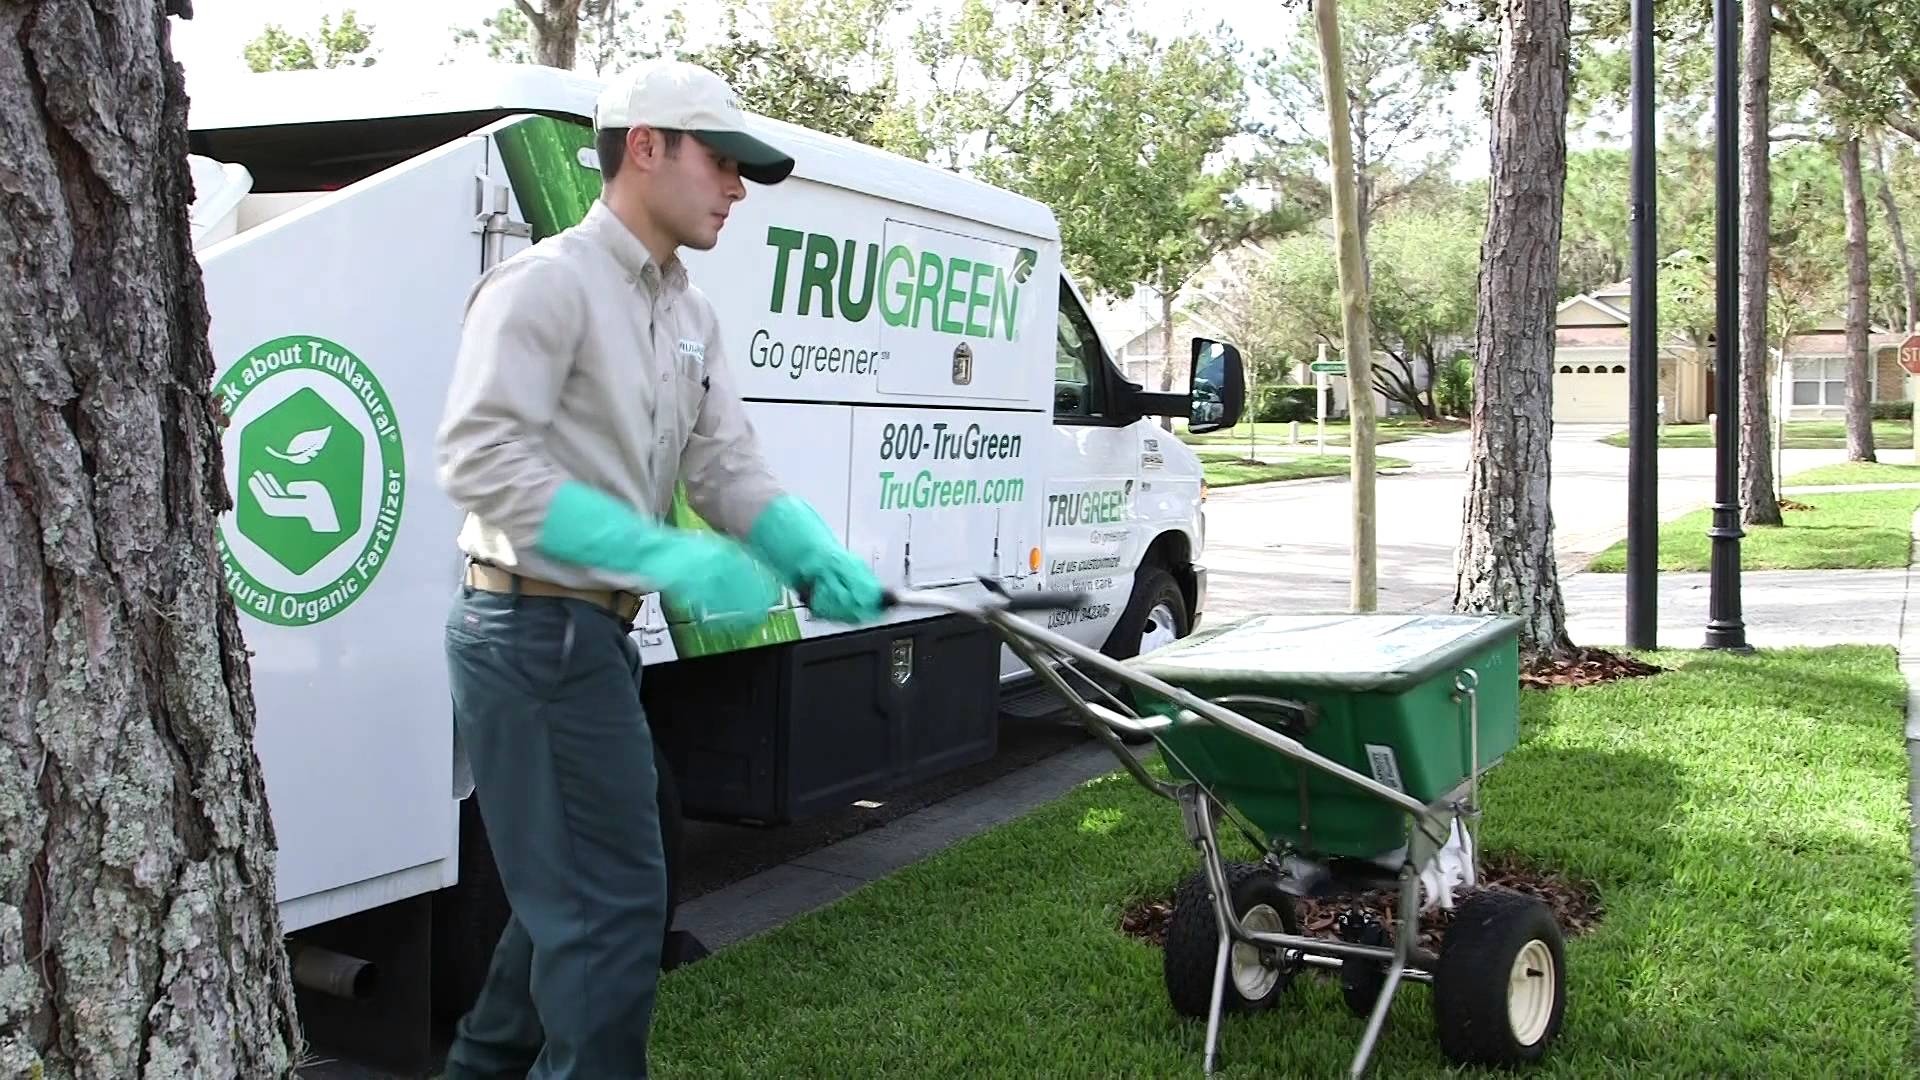 What Chemicals Does Trugreen Use in Lawn Care?